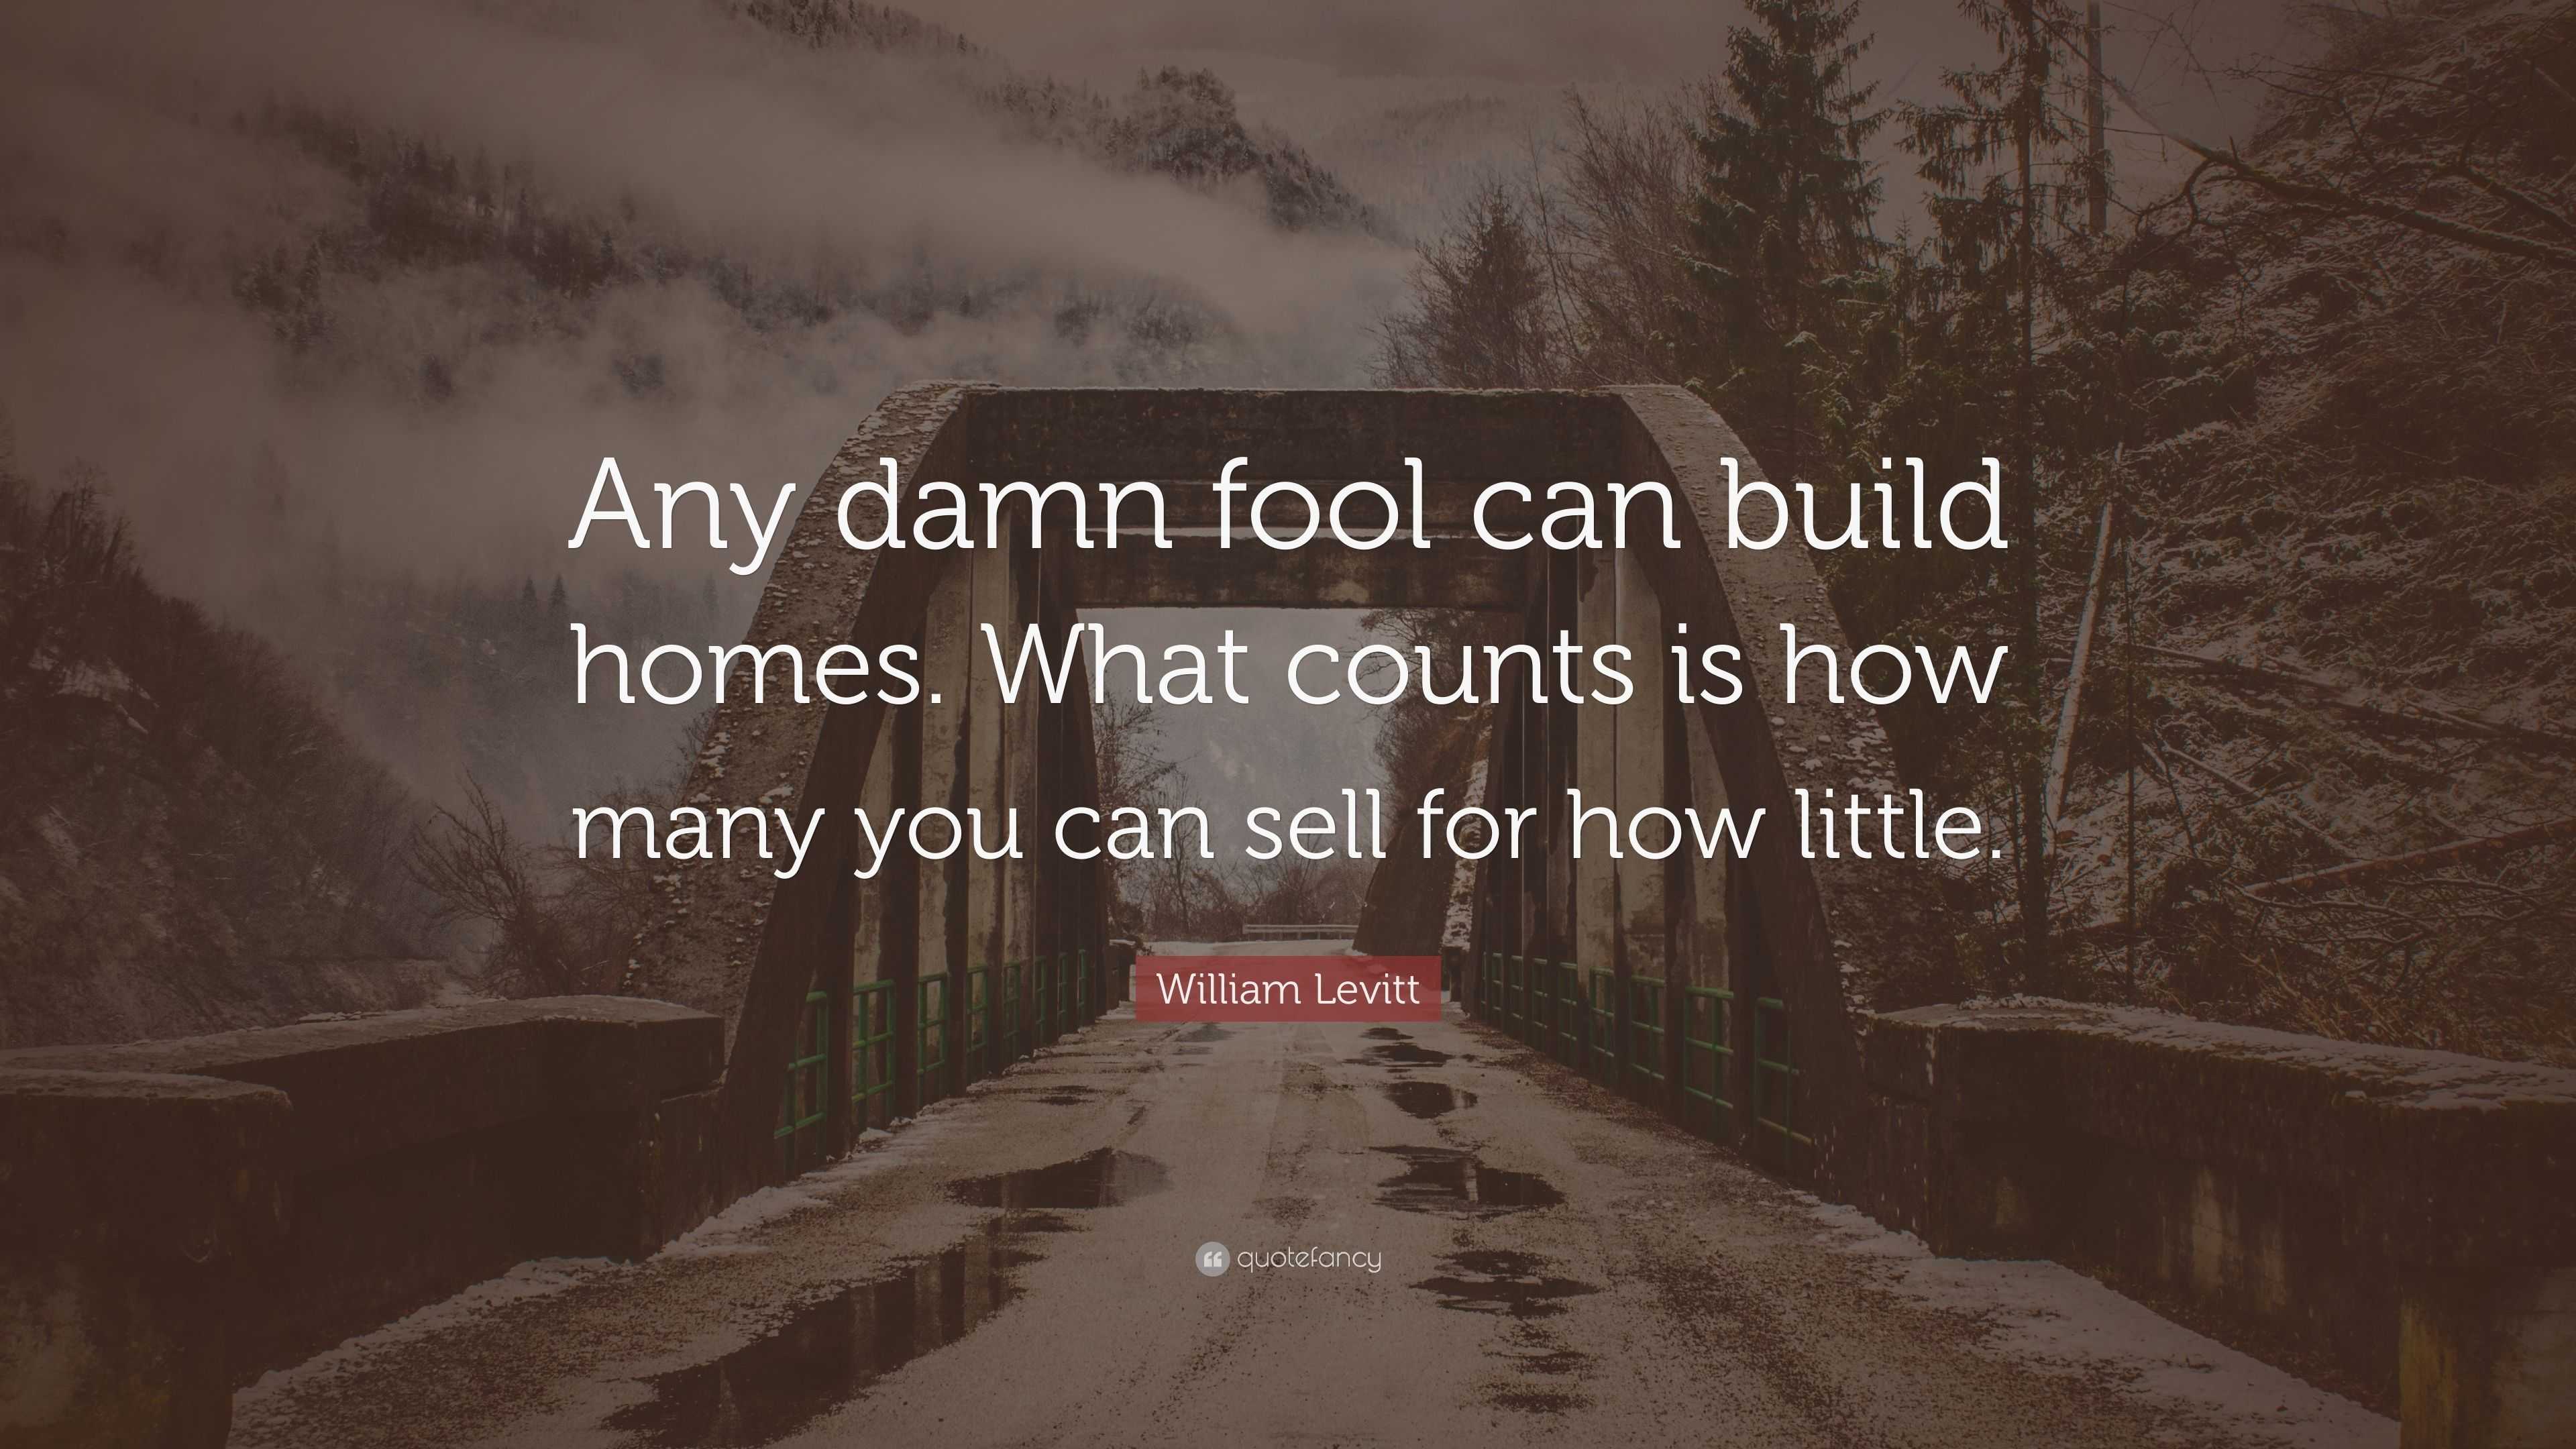 William Levitt Quote: “Any damn fool can build homes. What counts is ...
